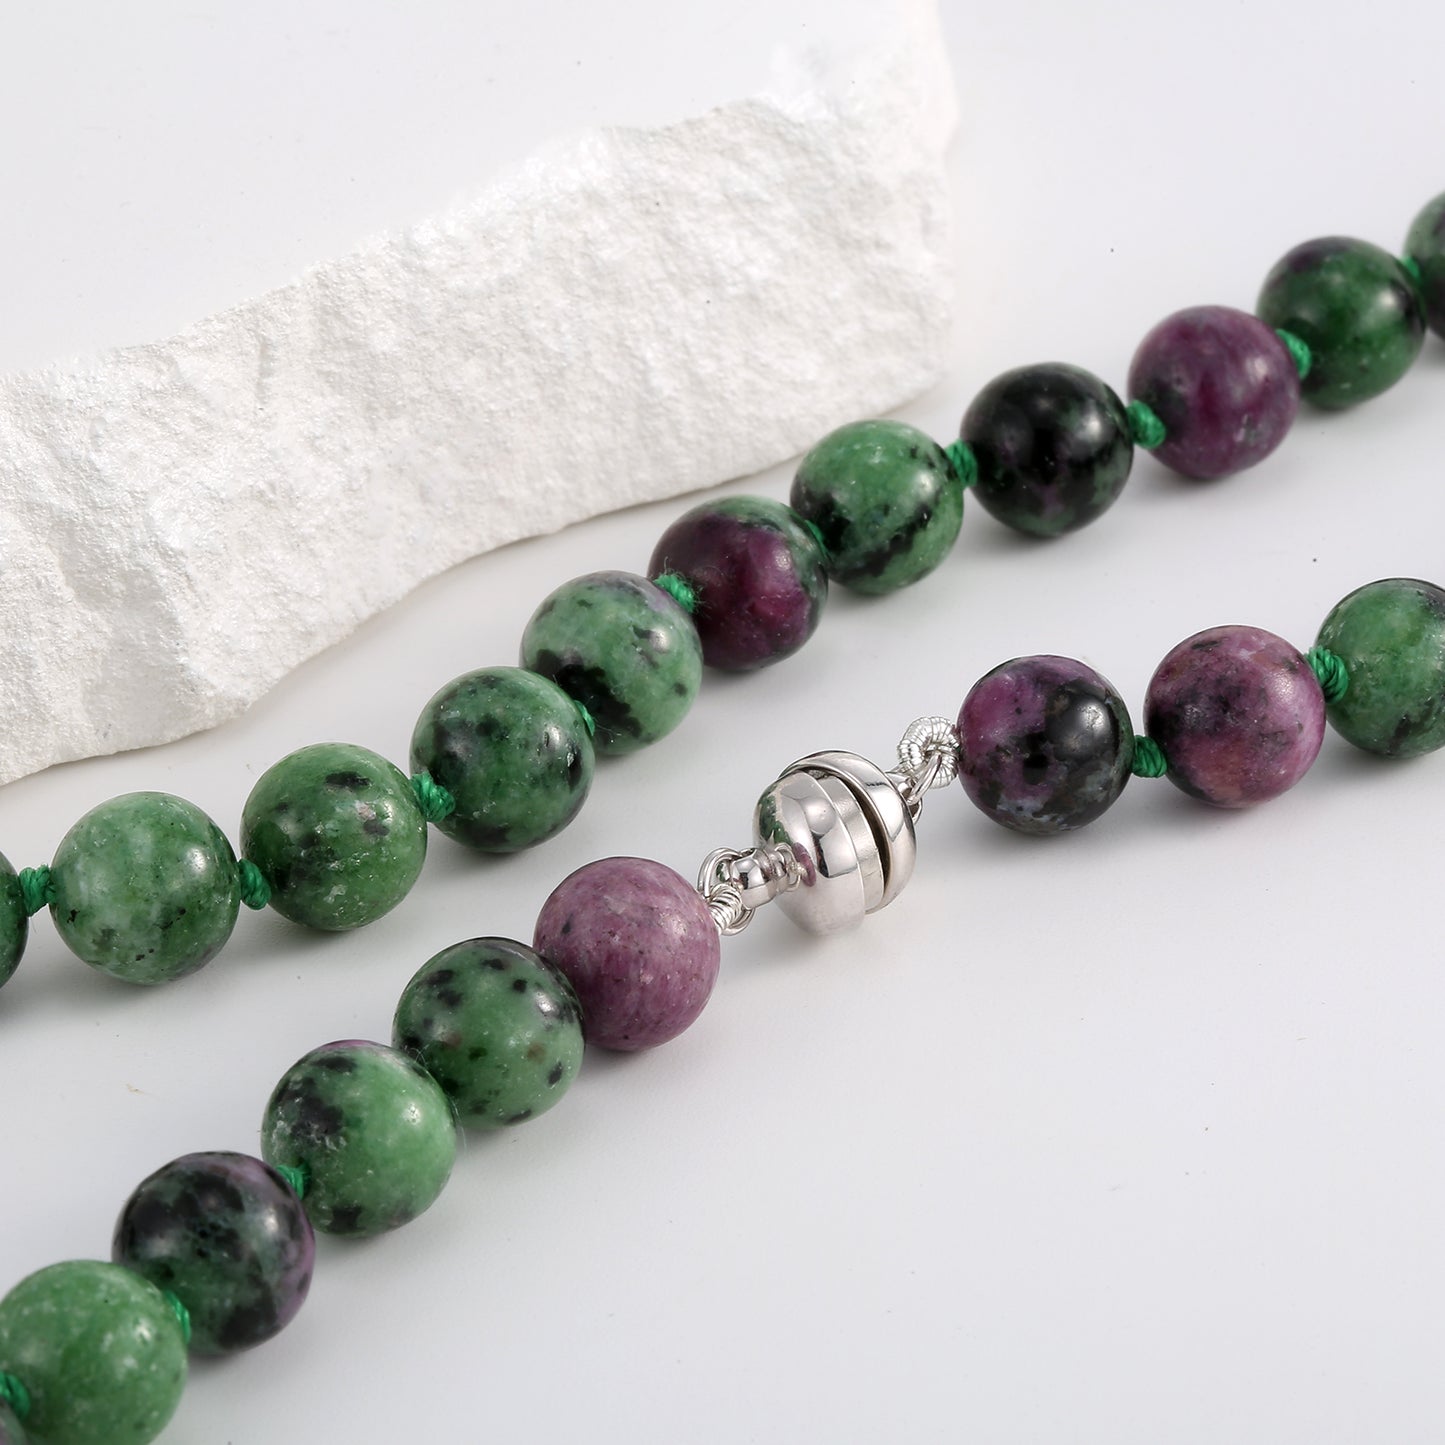 420ct Ruby Zoisite 20'' Necklace with 10mm Round Beads